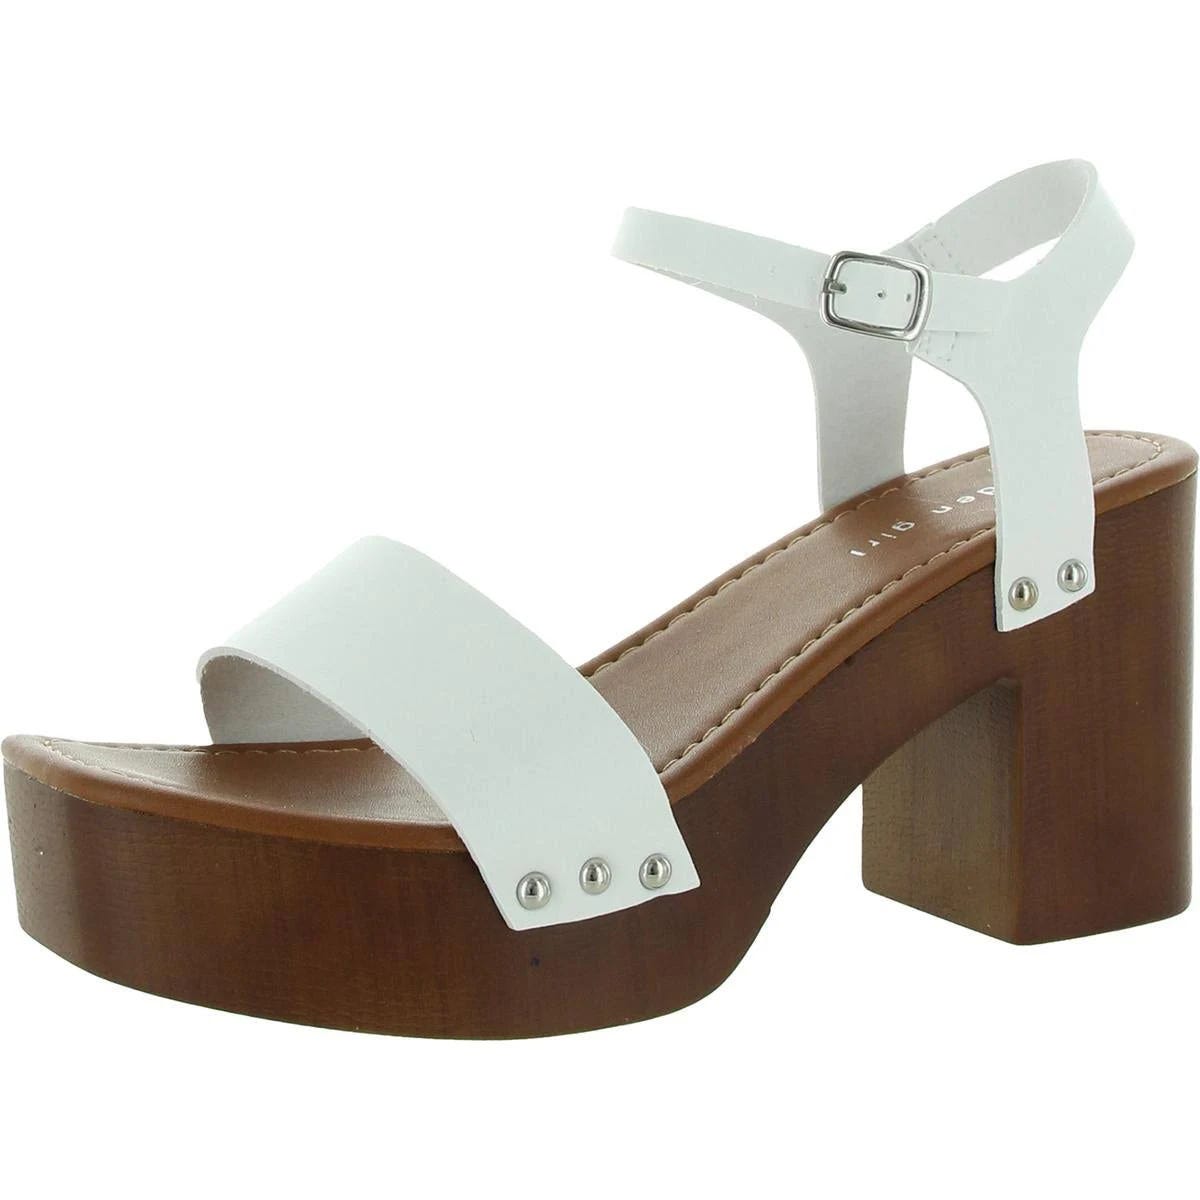 Comfortable Heeled Women's Sandals for Casual Occasions | Image